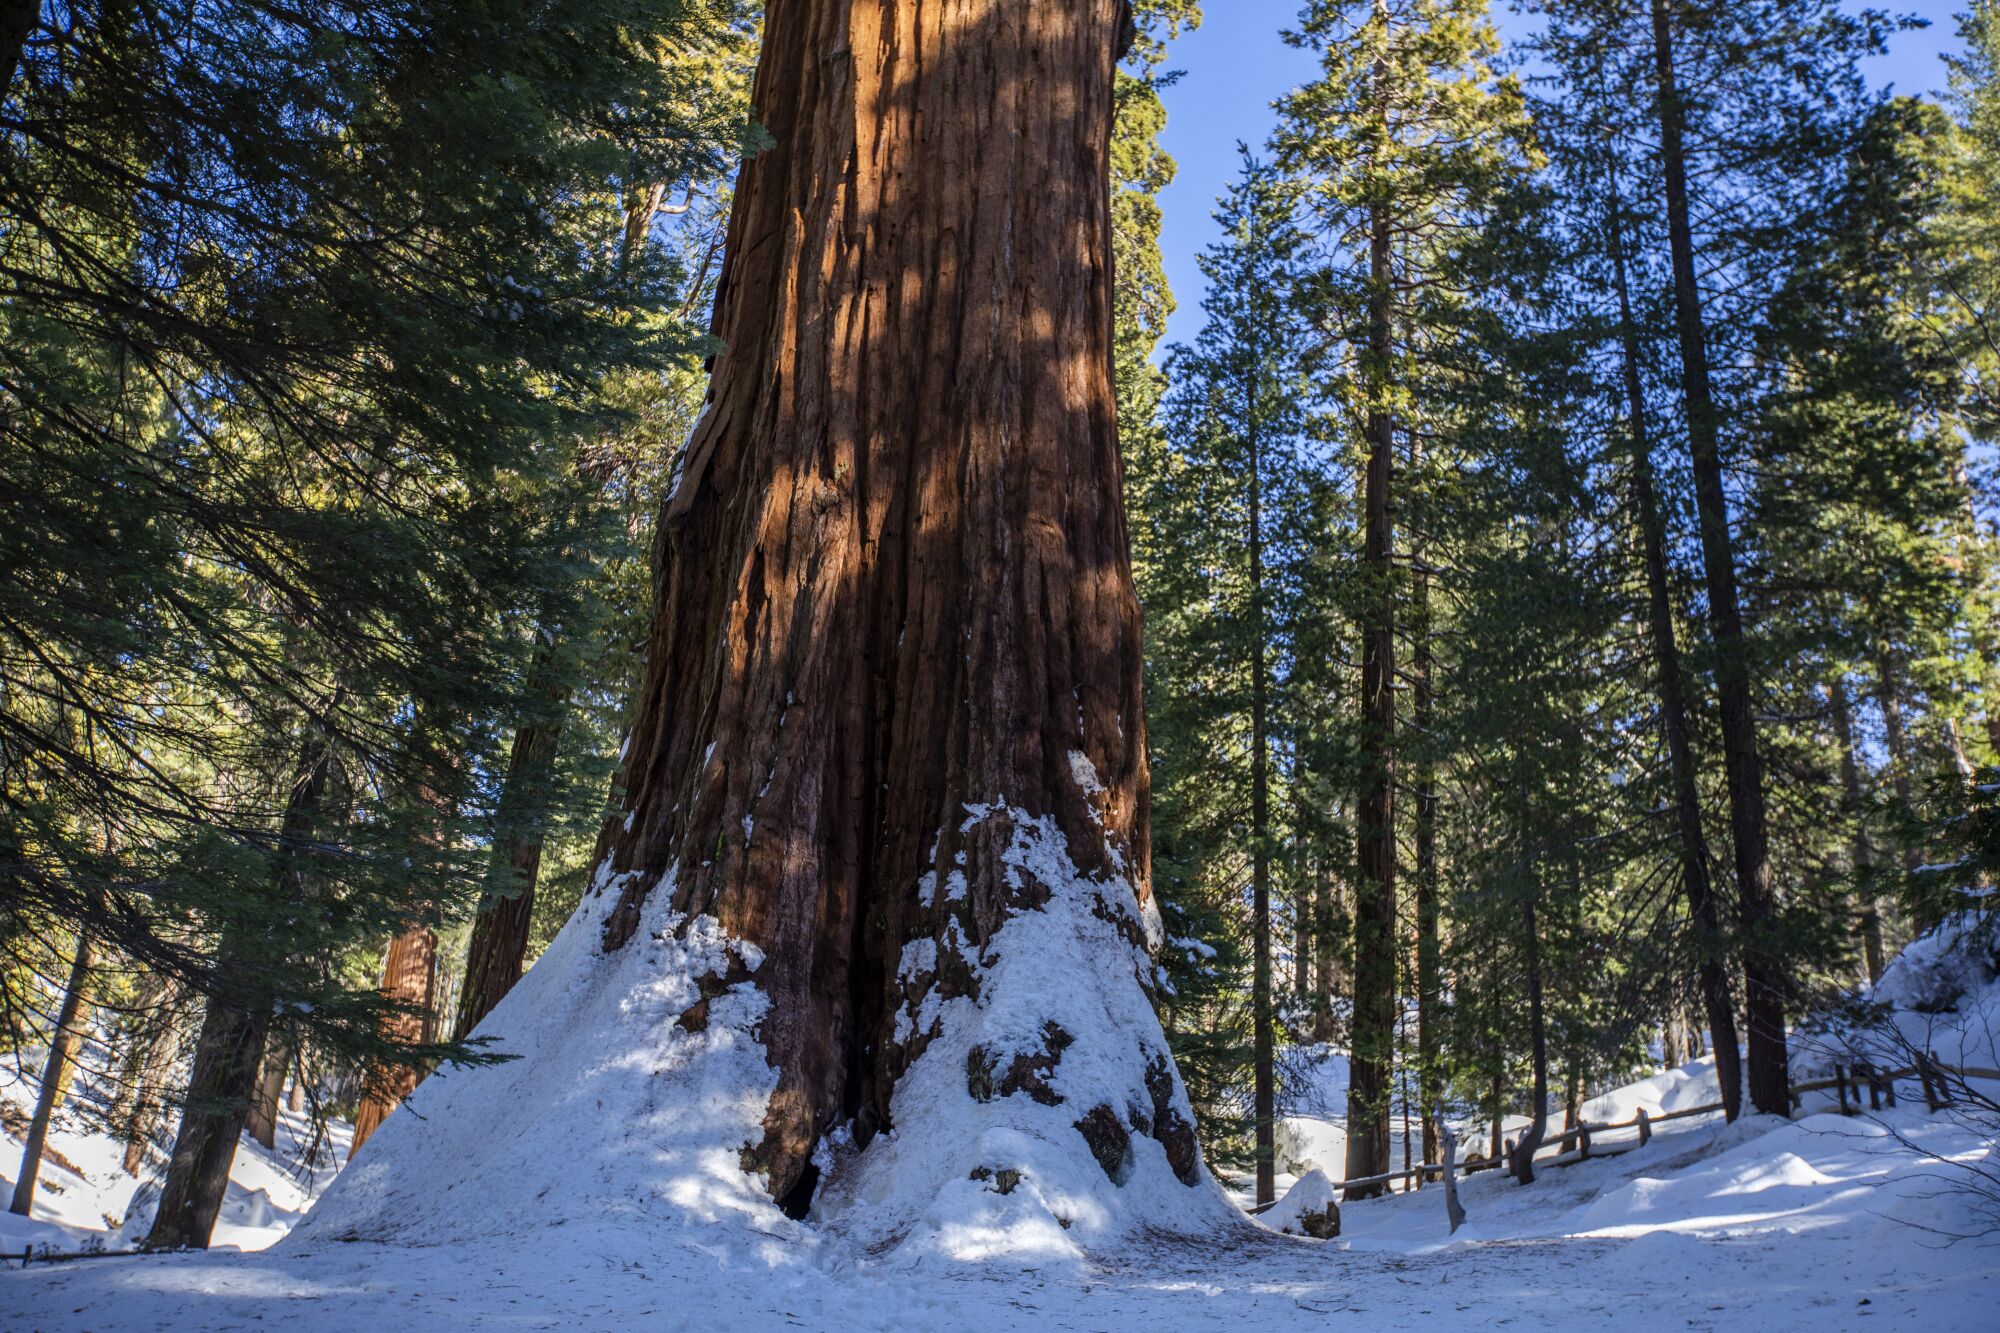 The trunk of a massive sequoia dwarfs surrounding trees as it rises from snow-covered ground.